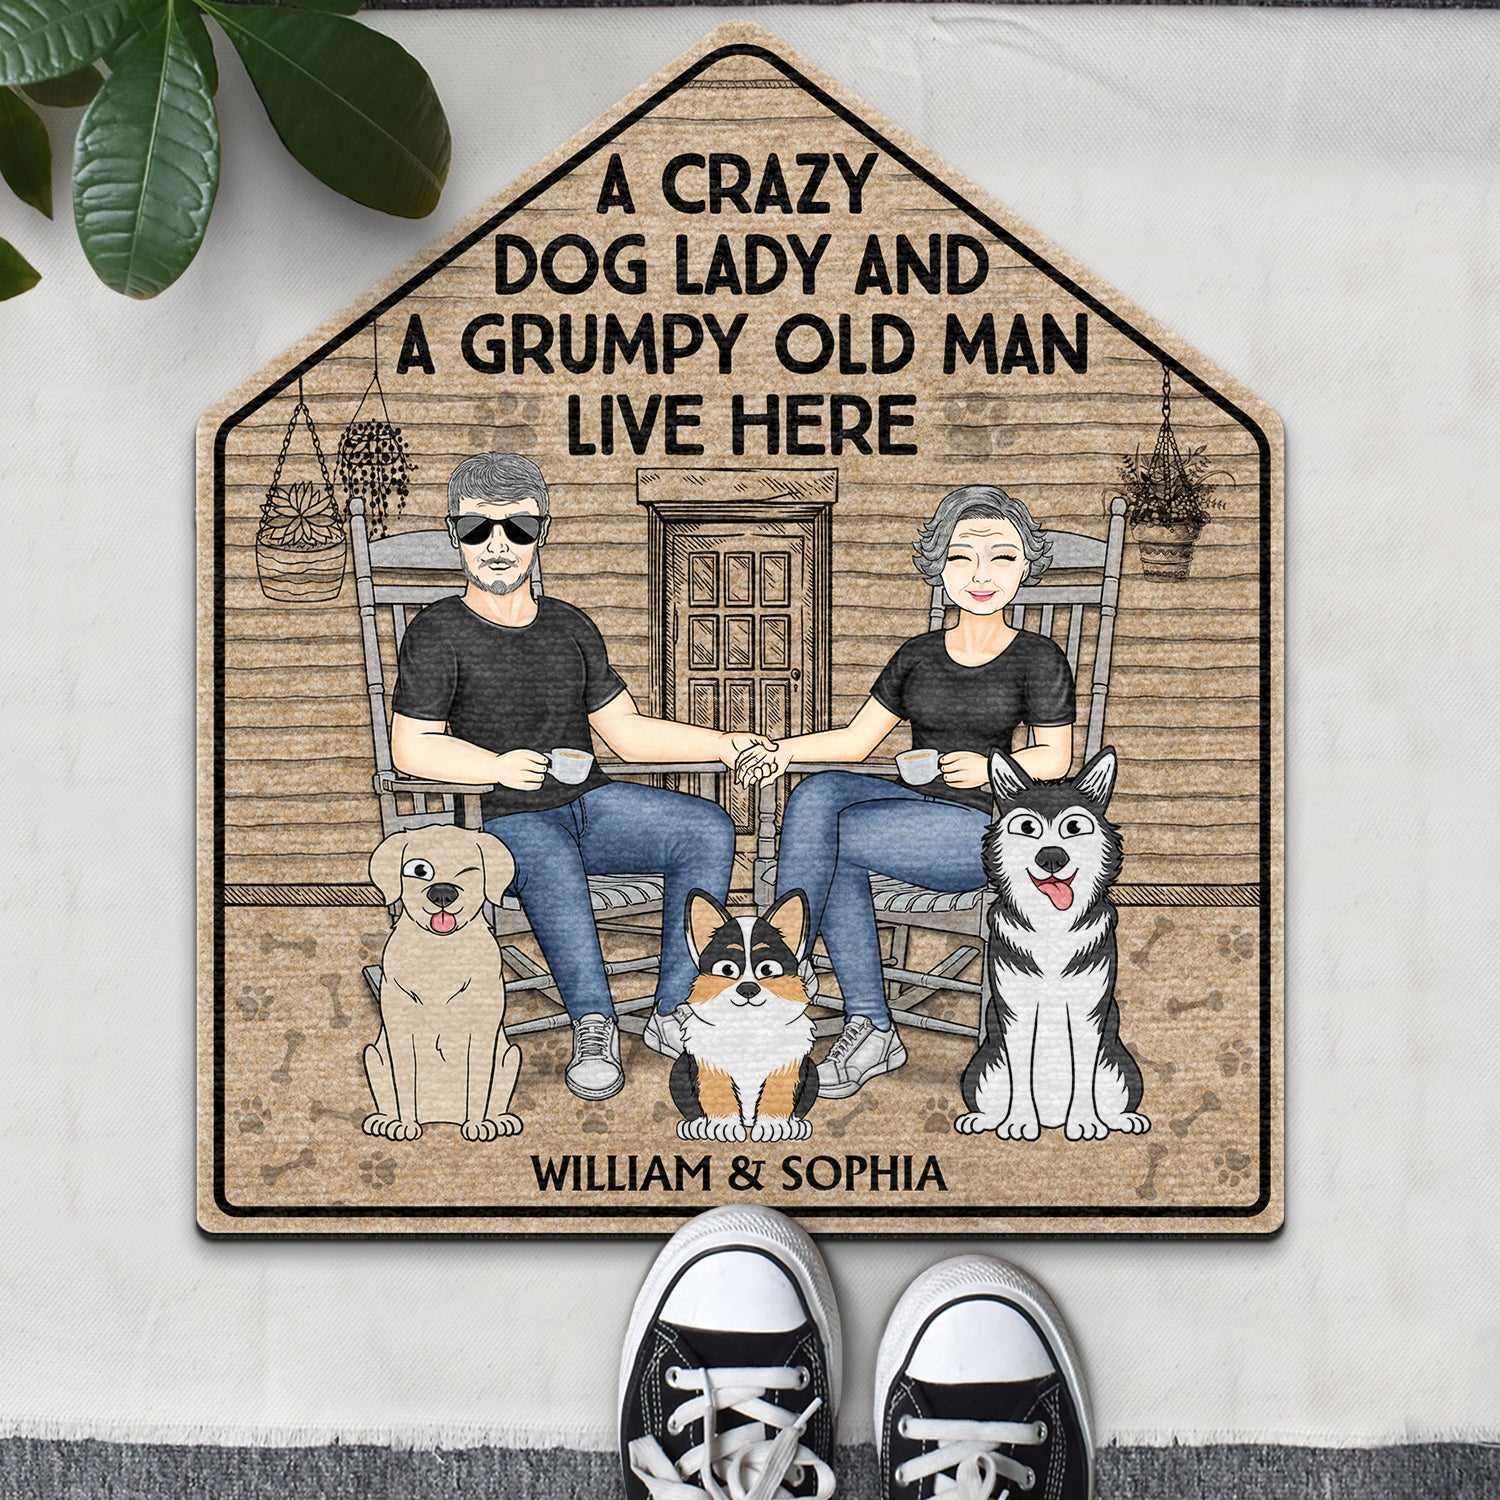 A Crazy Dog Lady And Her Grumpy Old Man Live Here - Gift For Couples, Pet Lovers And Family - Personalized Custom Shaped Doormat